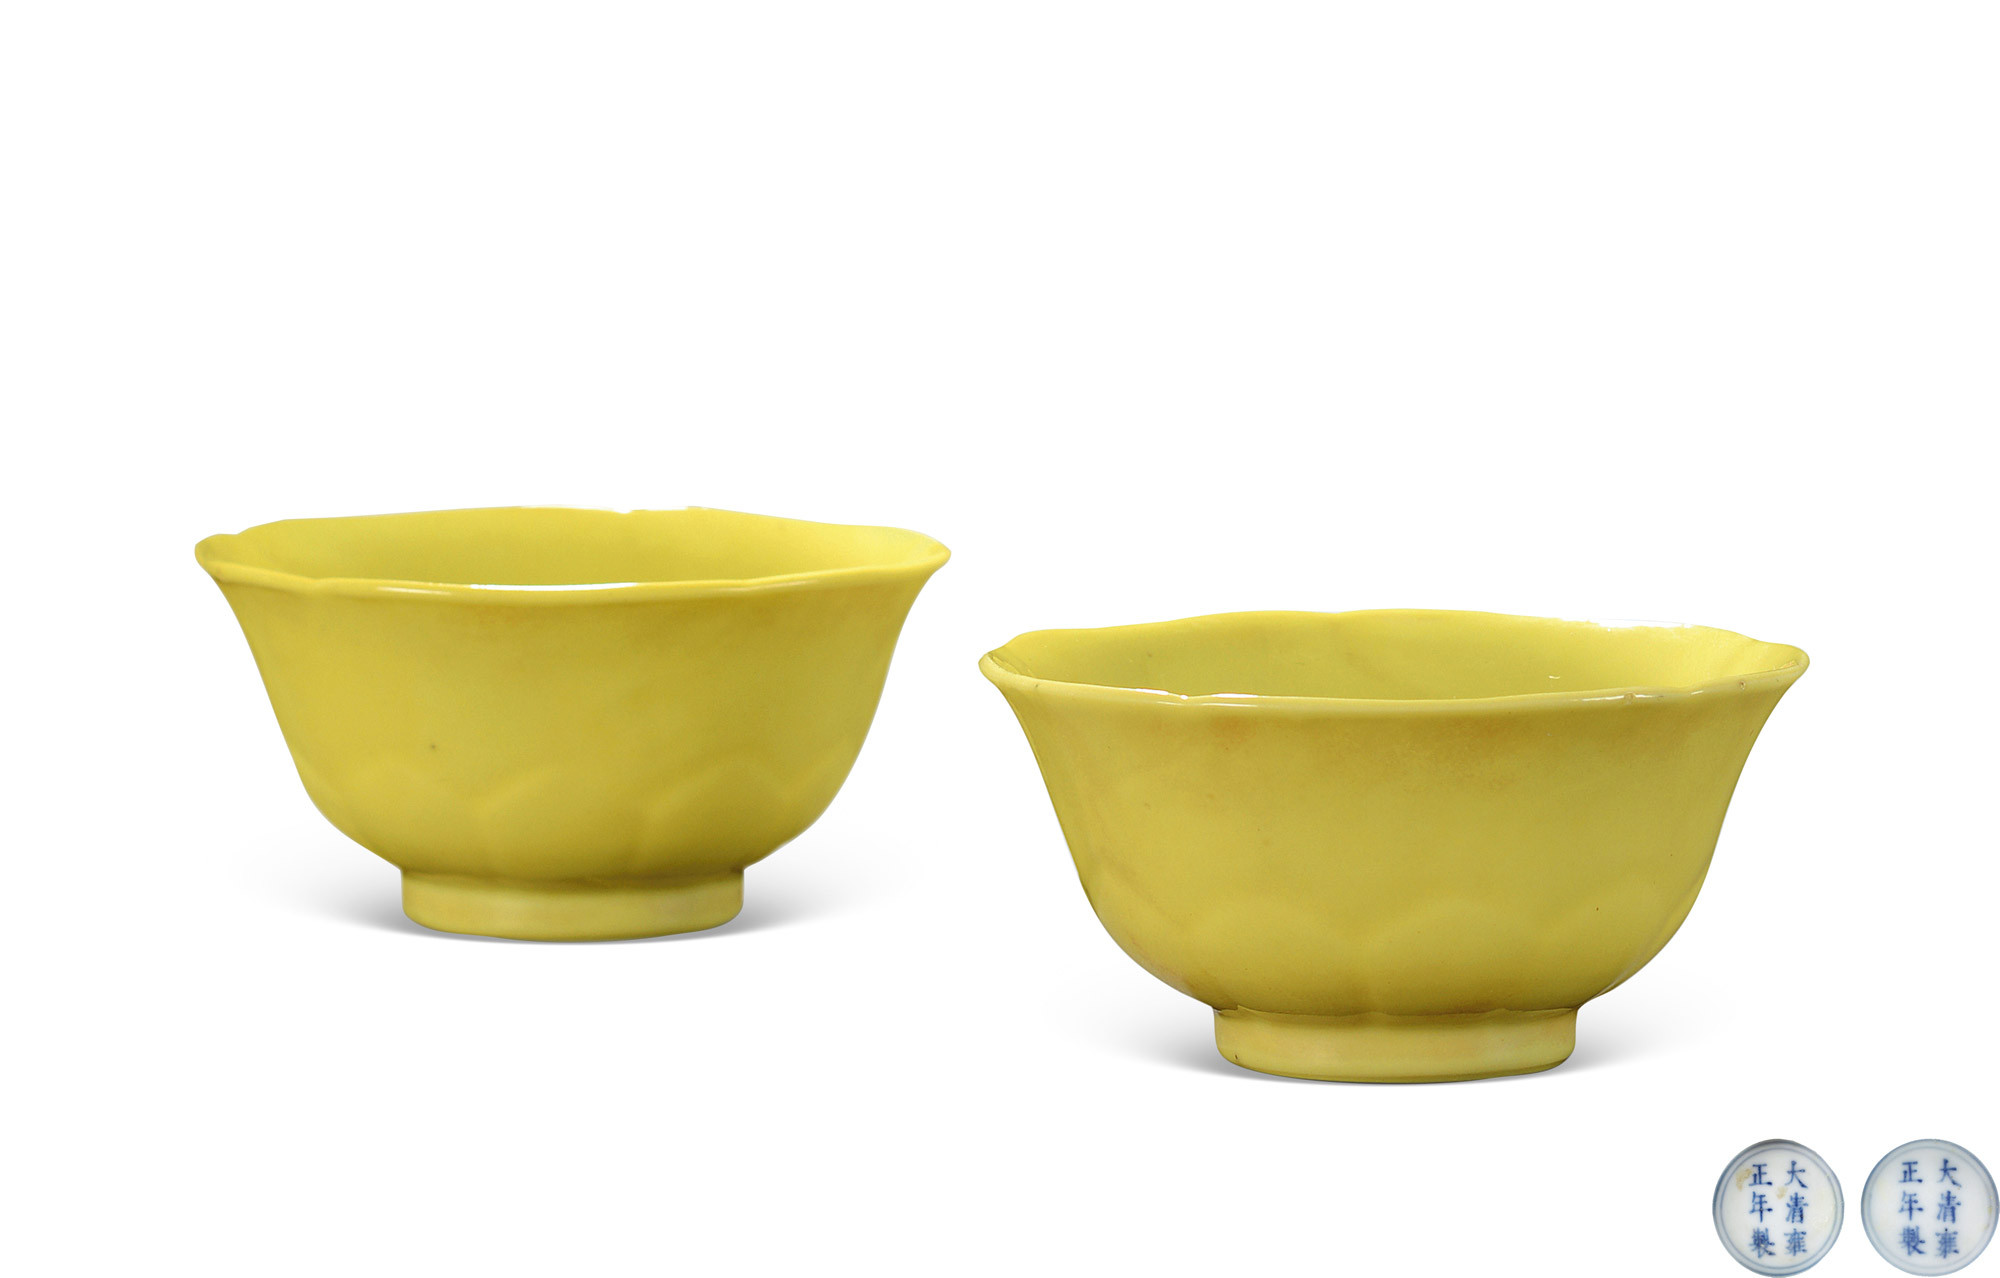 A PAIR OF  LEMON-YELLOW GLAZED LOTUS SHAPED CUPS